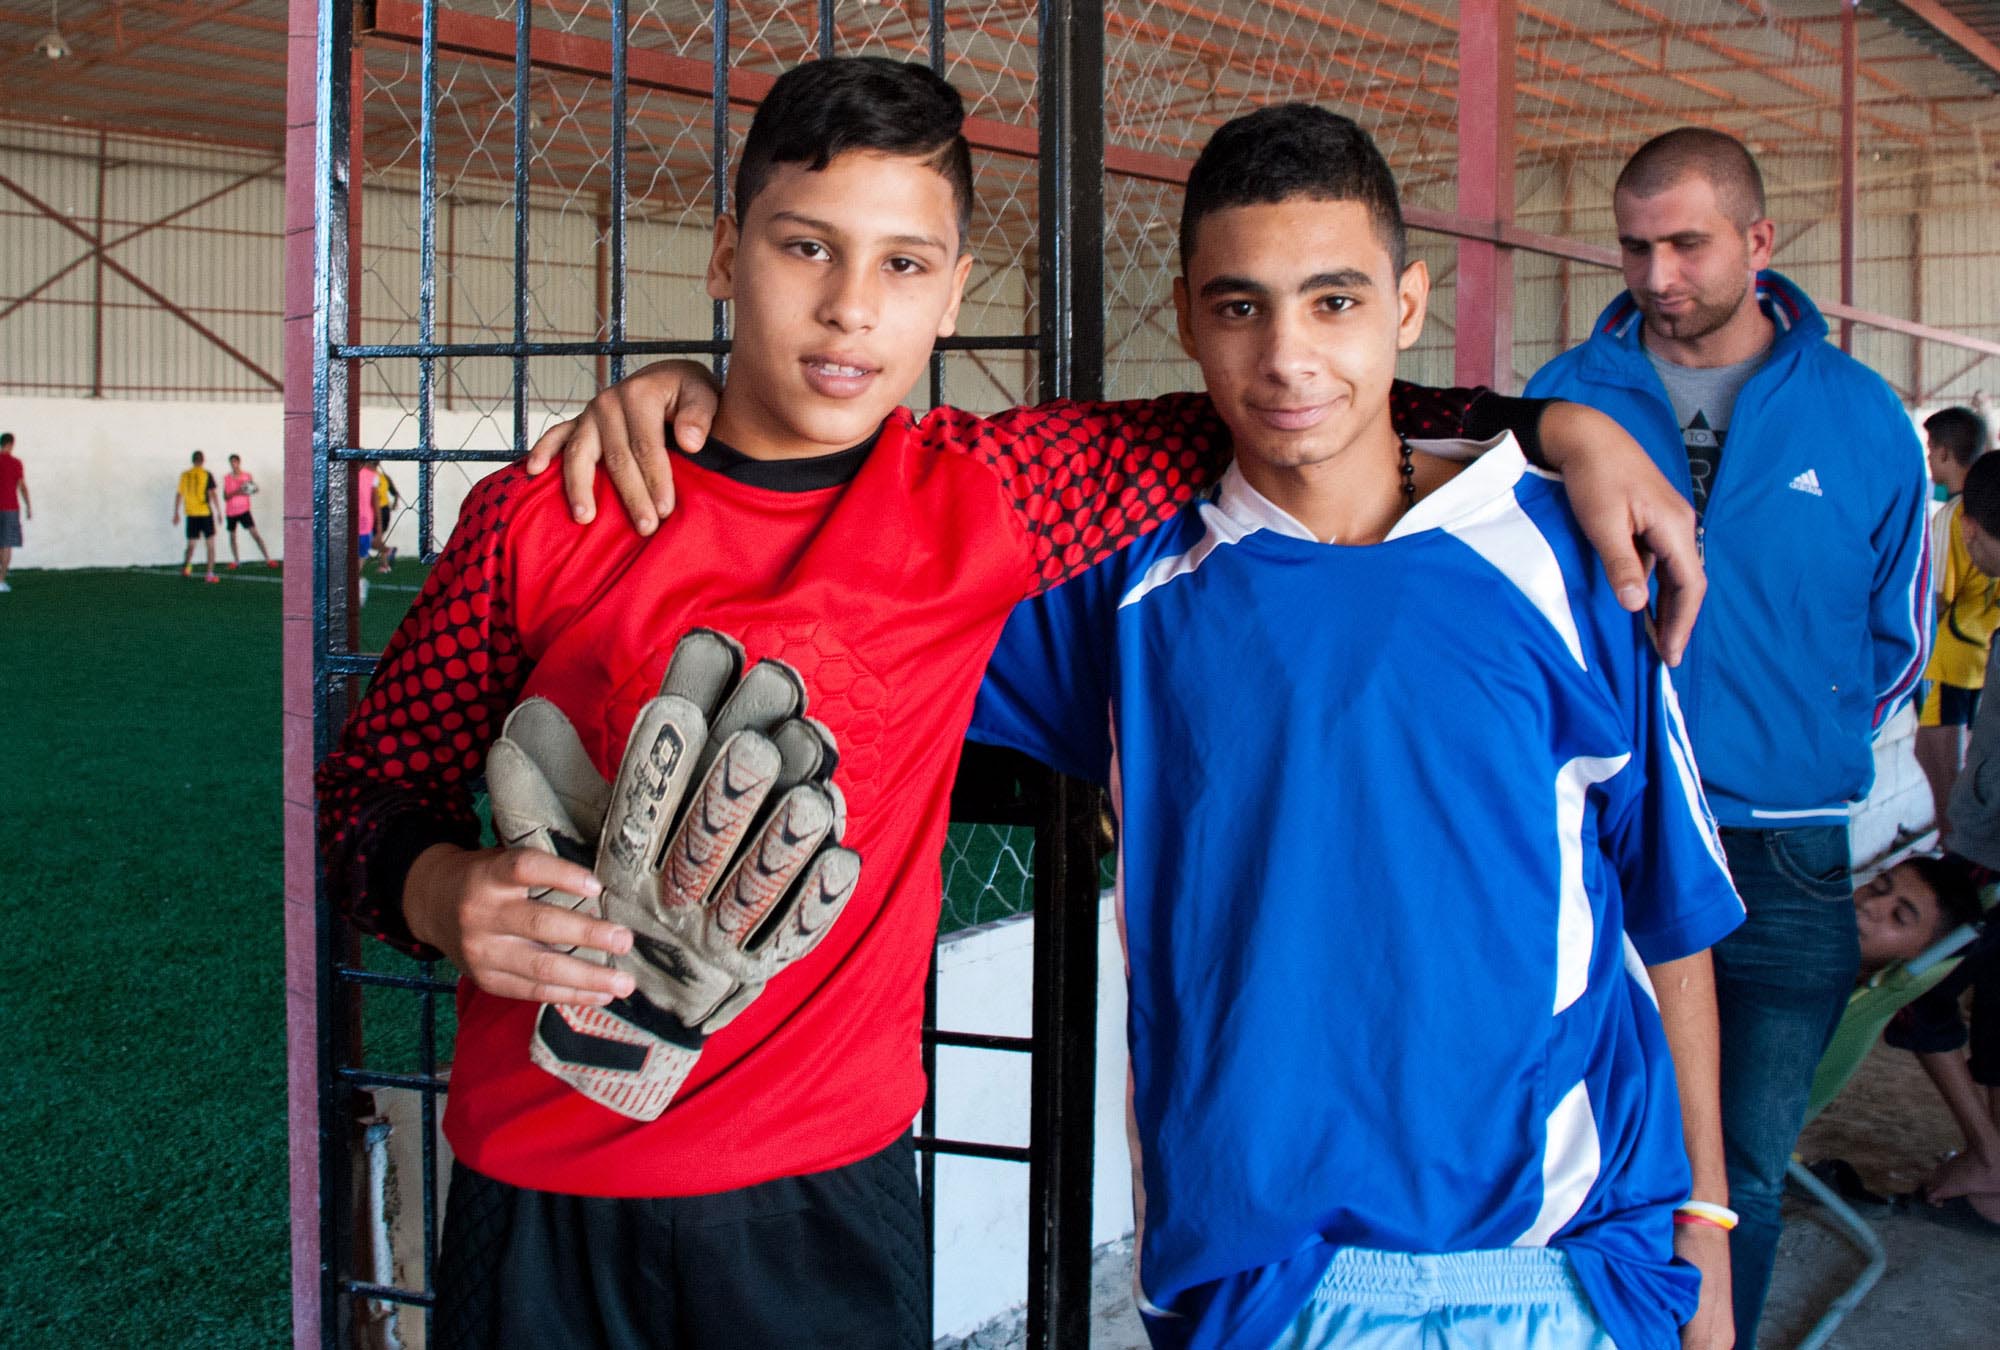 Soccer players participating in Anera's sports for peace and development program in Lebanon.